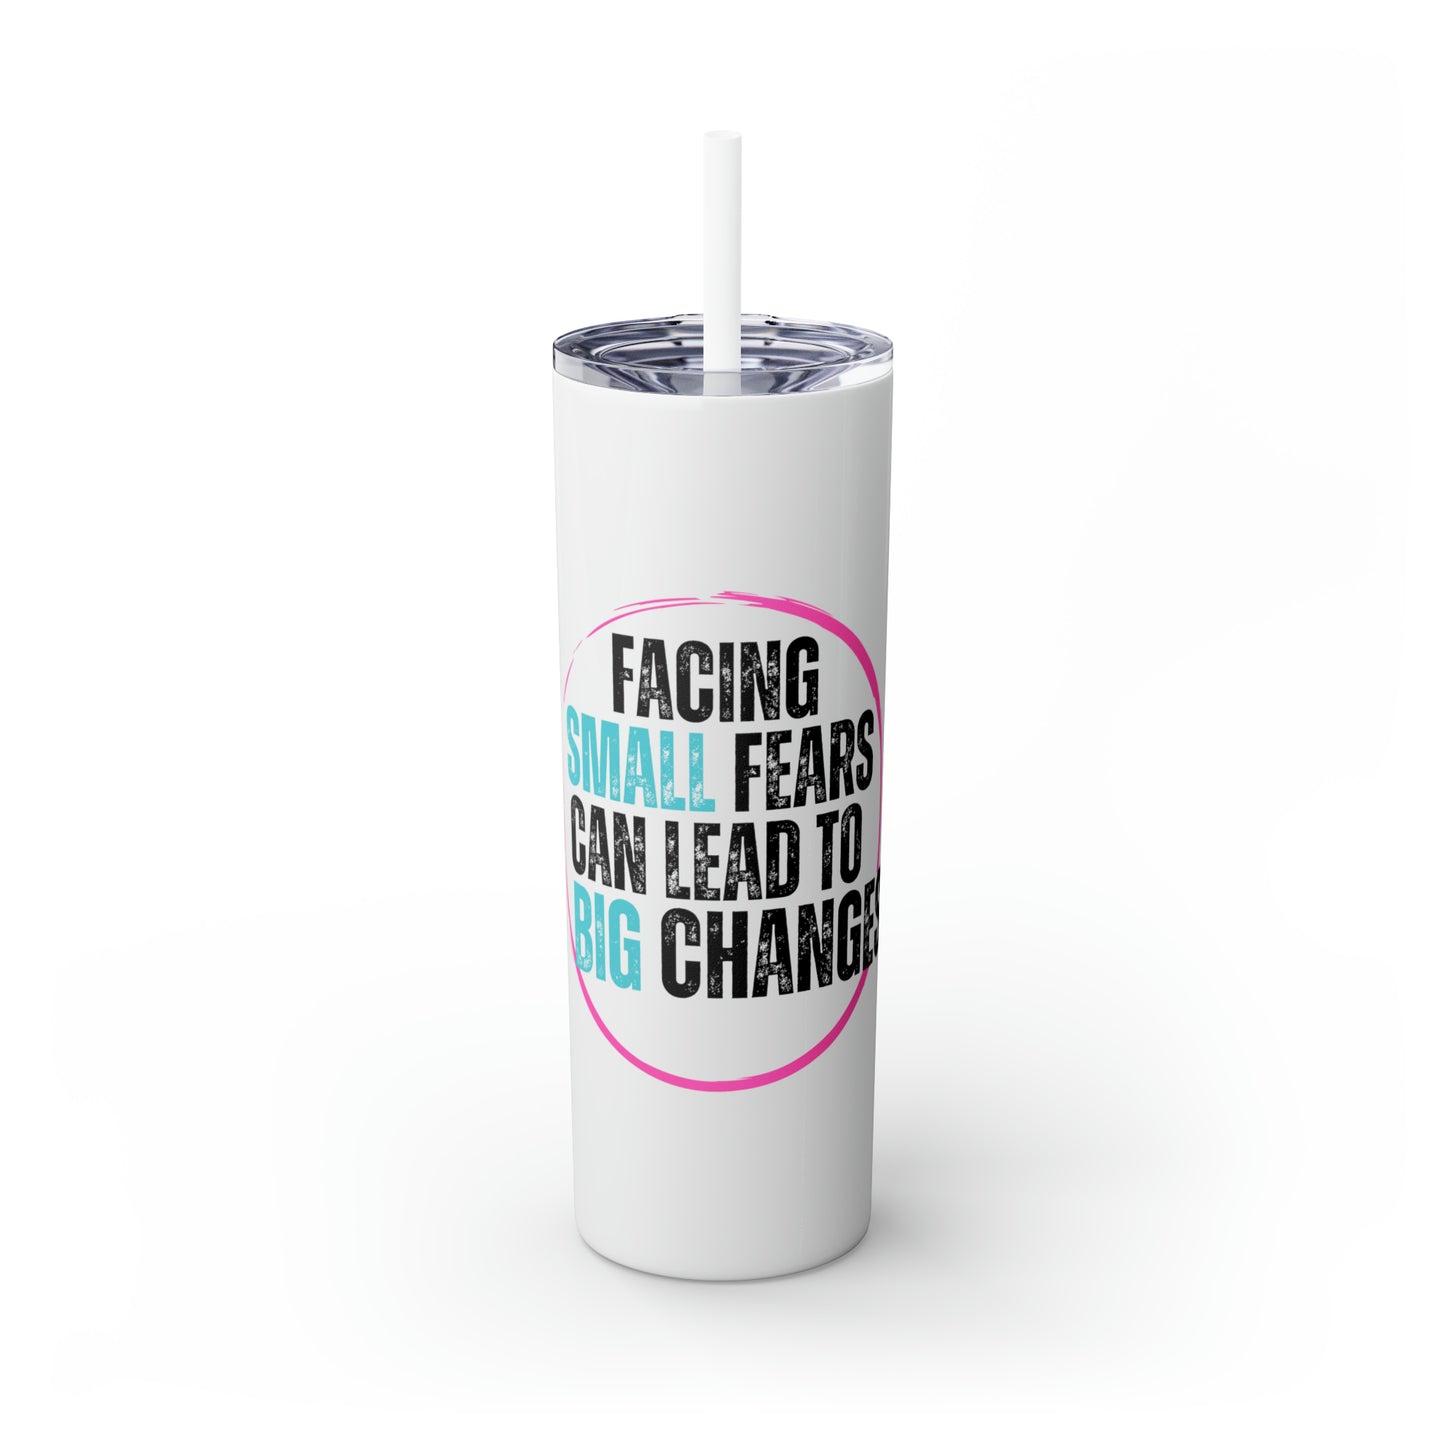 Skinny Small Fears Can Lead to Big Changes Tumbler with Straw, 20oz